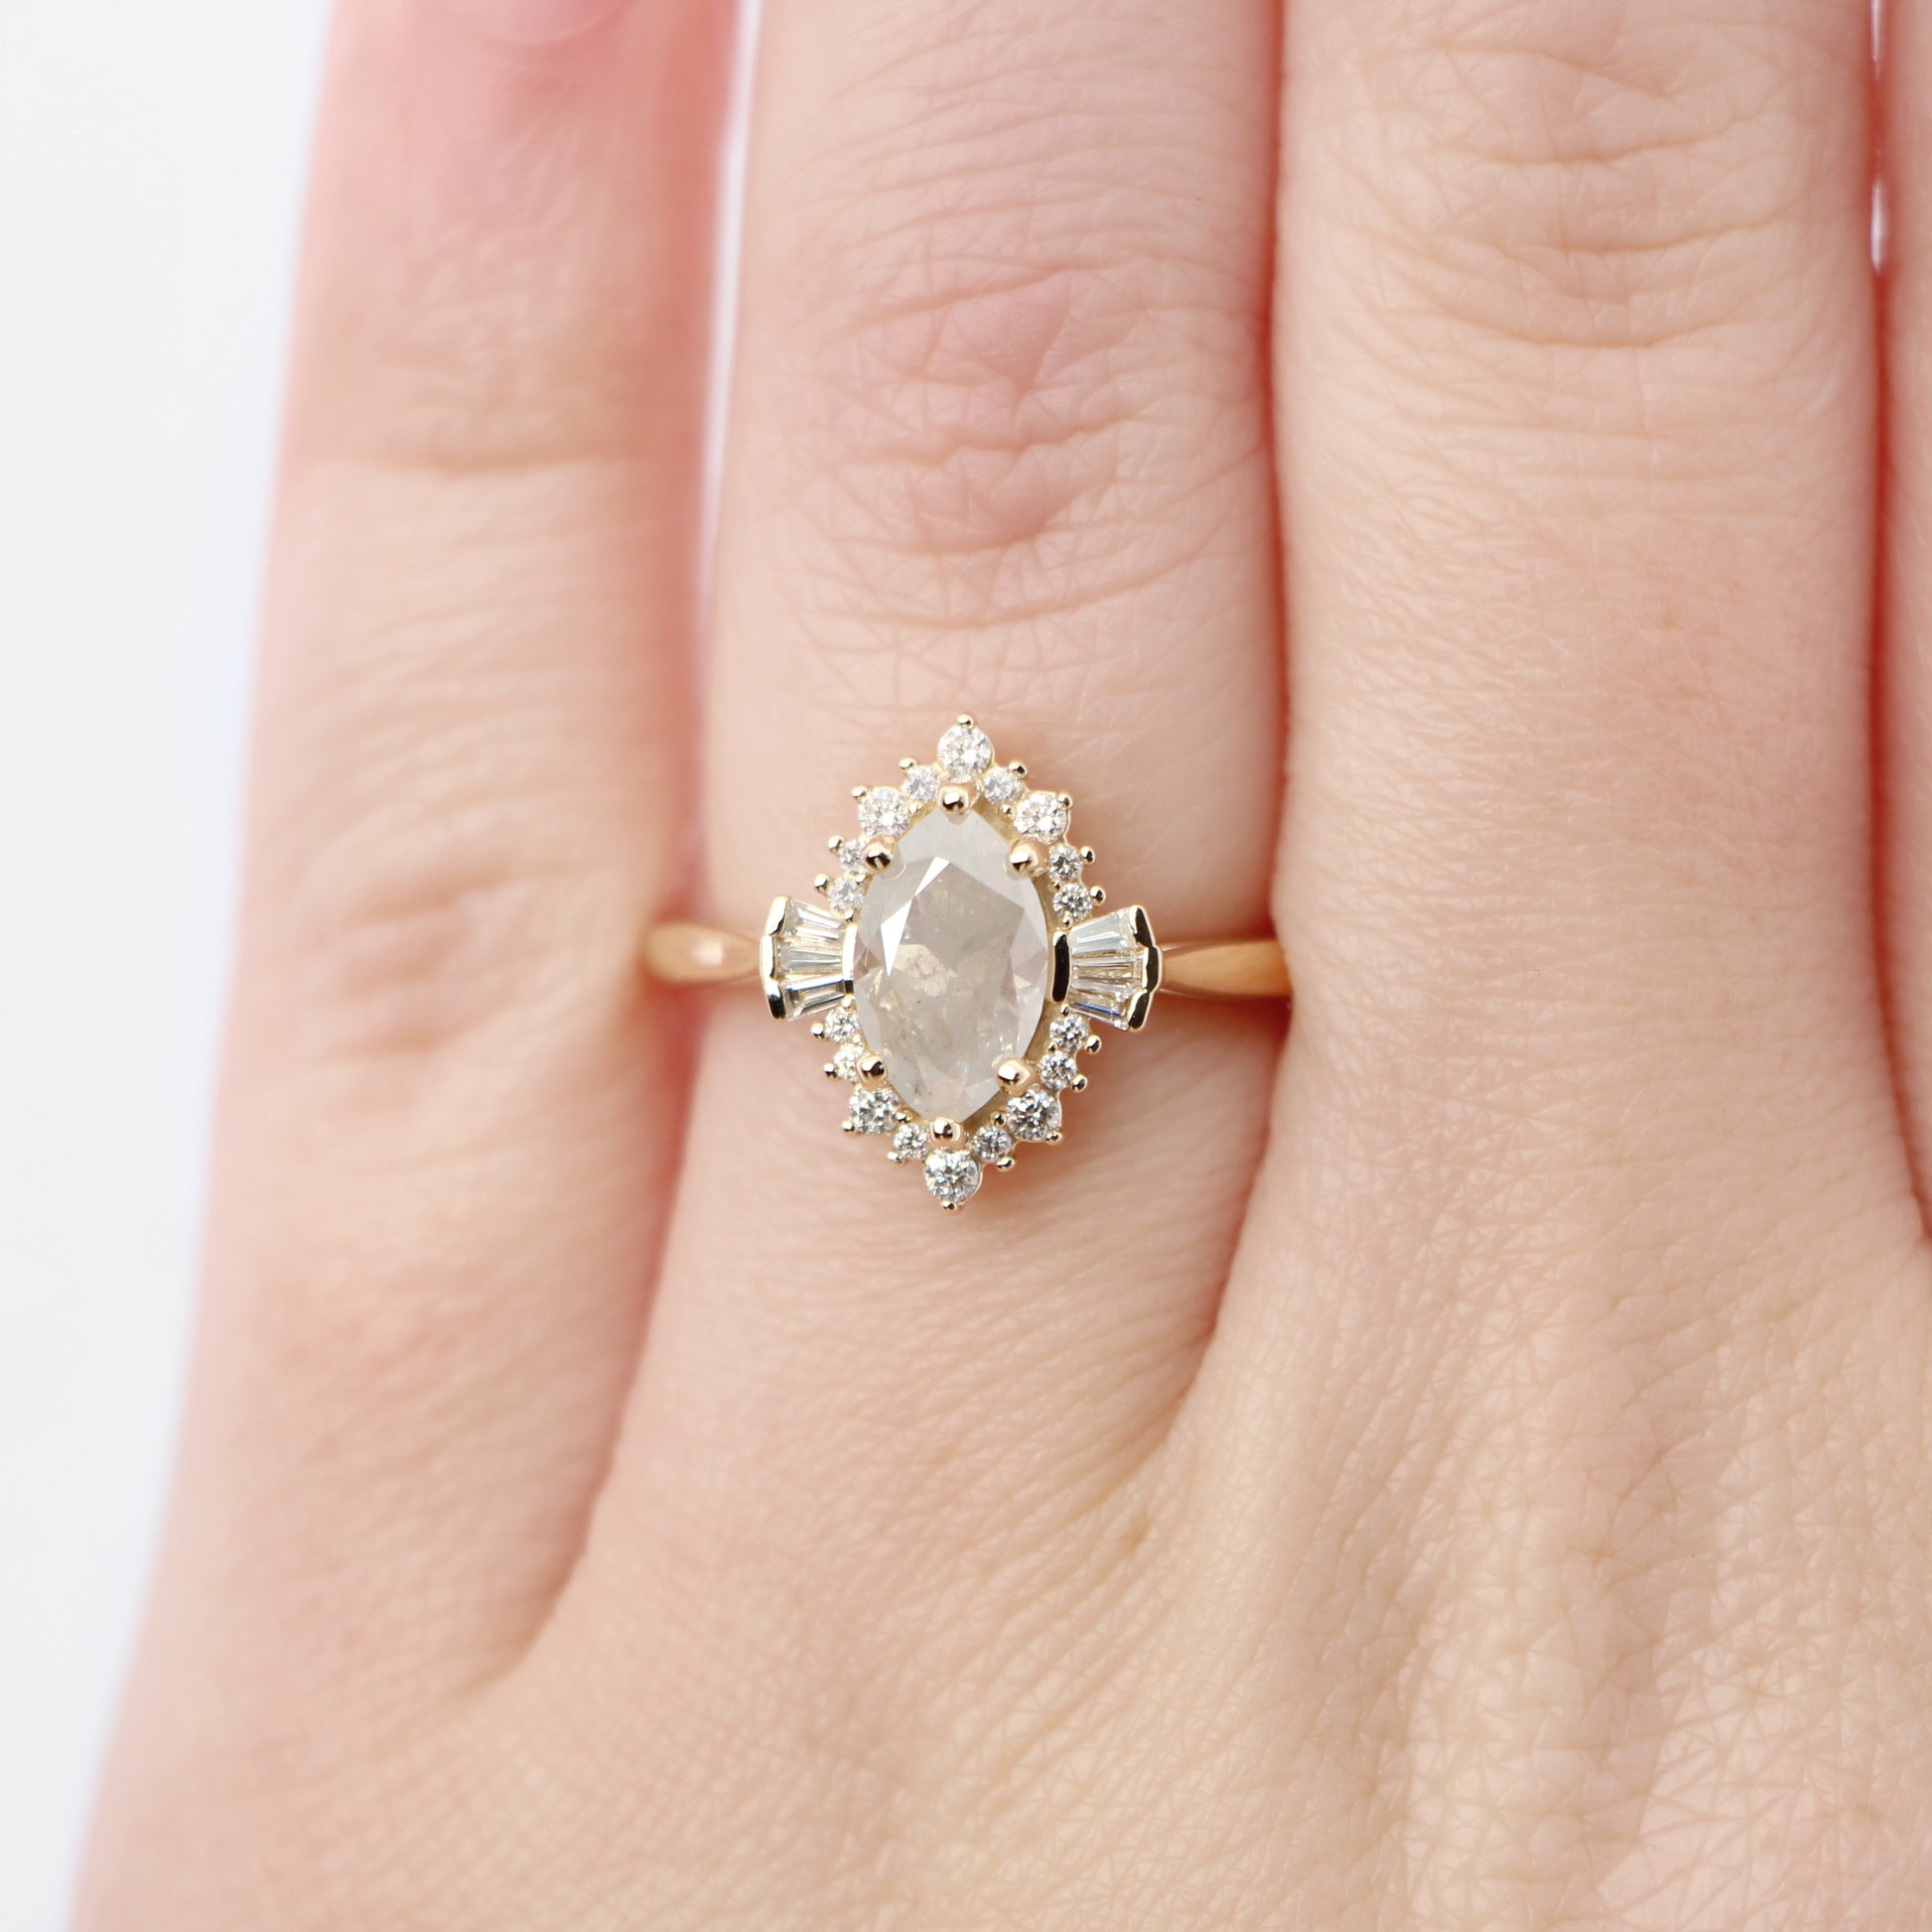 Meghan Ring with a 1.40 Carat Misty Gray Marquise Celestial Diamond and White Accent Diamonds in 14k Yellow Gold - Ready to Size and Ship - Midwinter Co. Alternative Bridal Rings and Modern Fine Jewelry